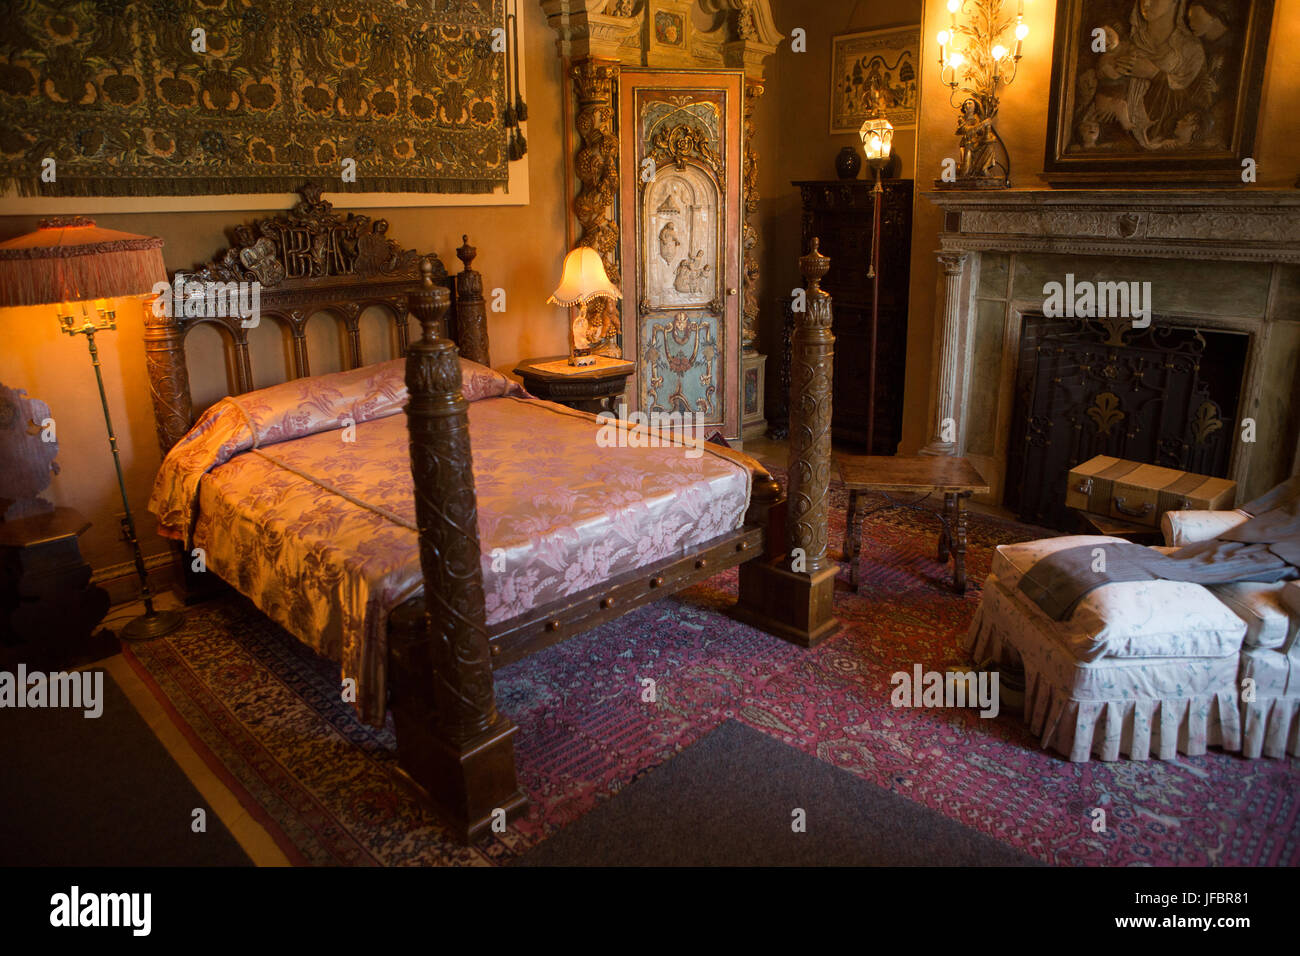 A bedroom decorated with furniture, tapestries, artwork and ornate light fixtures. Stock Photo